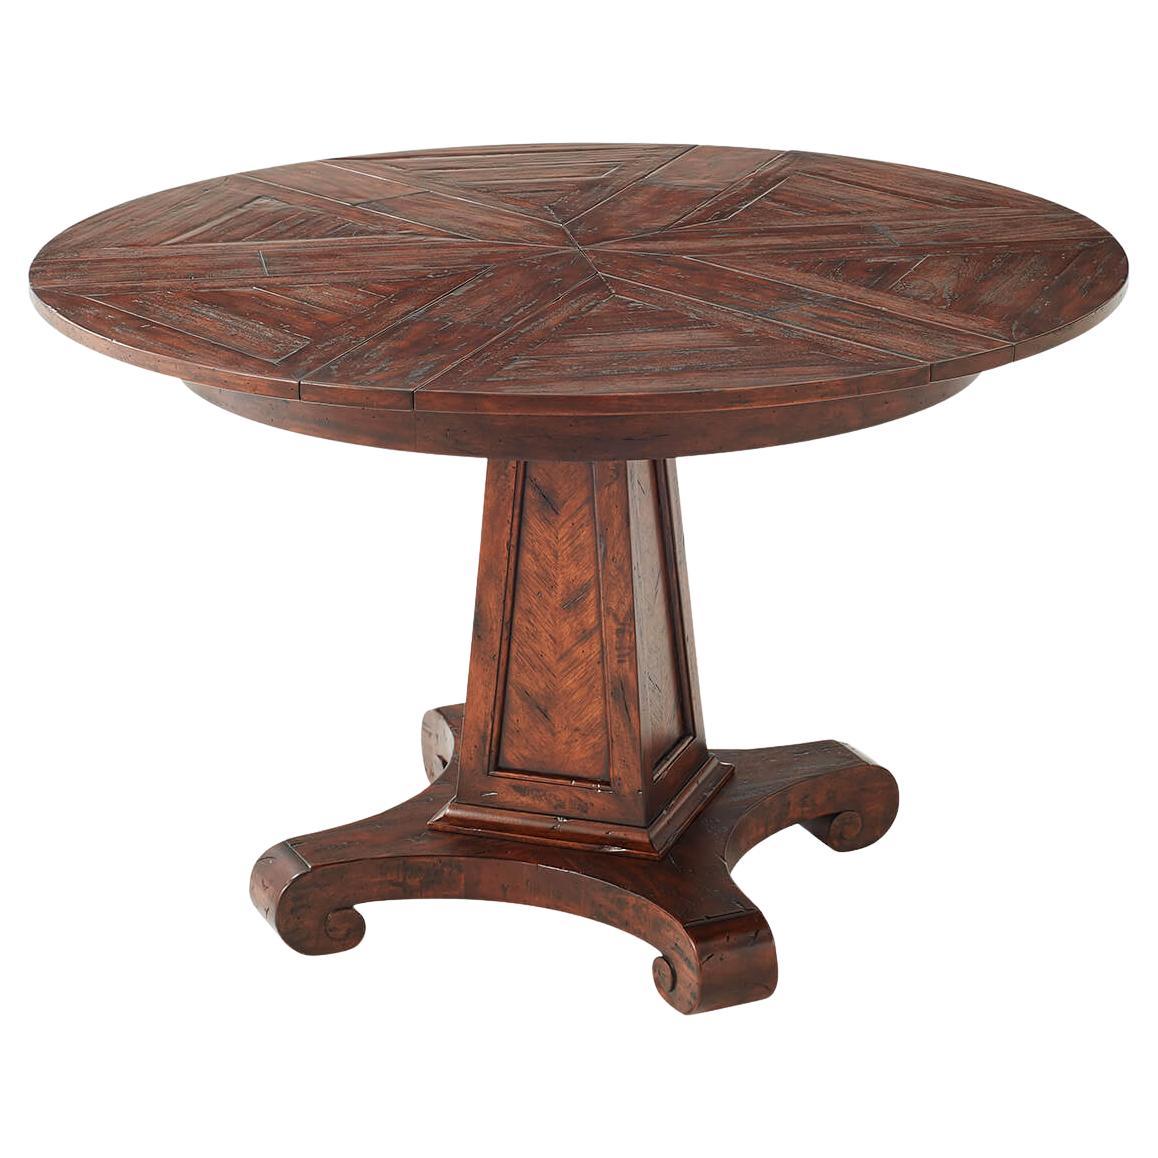 Antiqued Circular Extending Dining Table